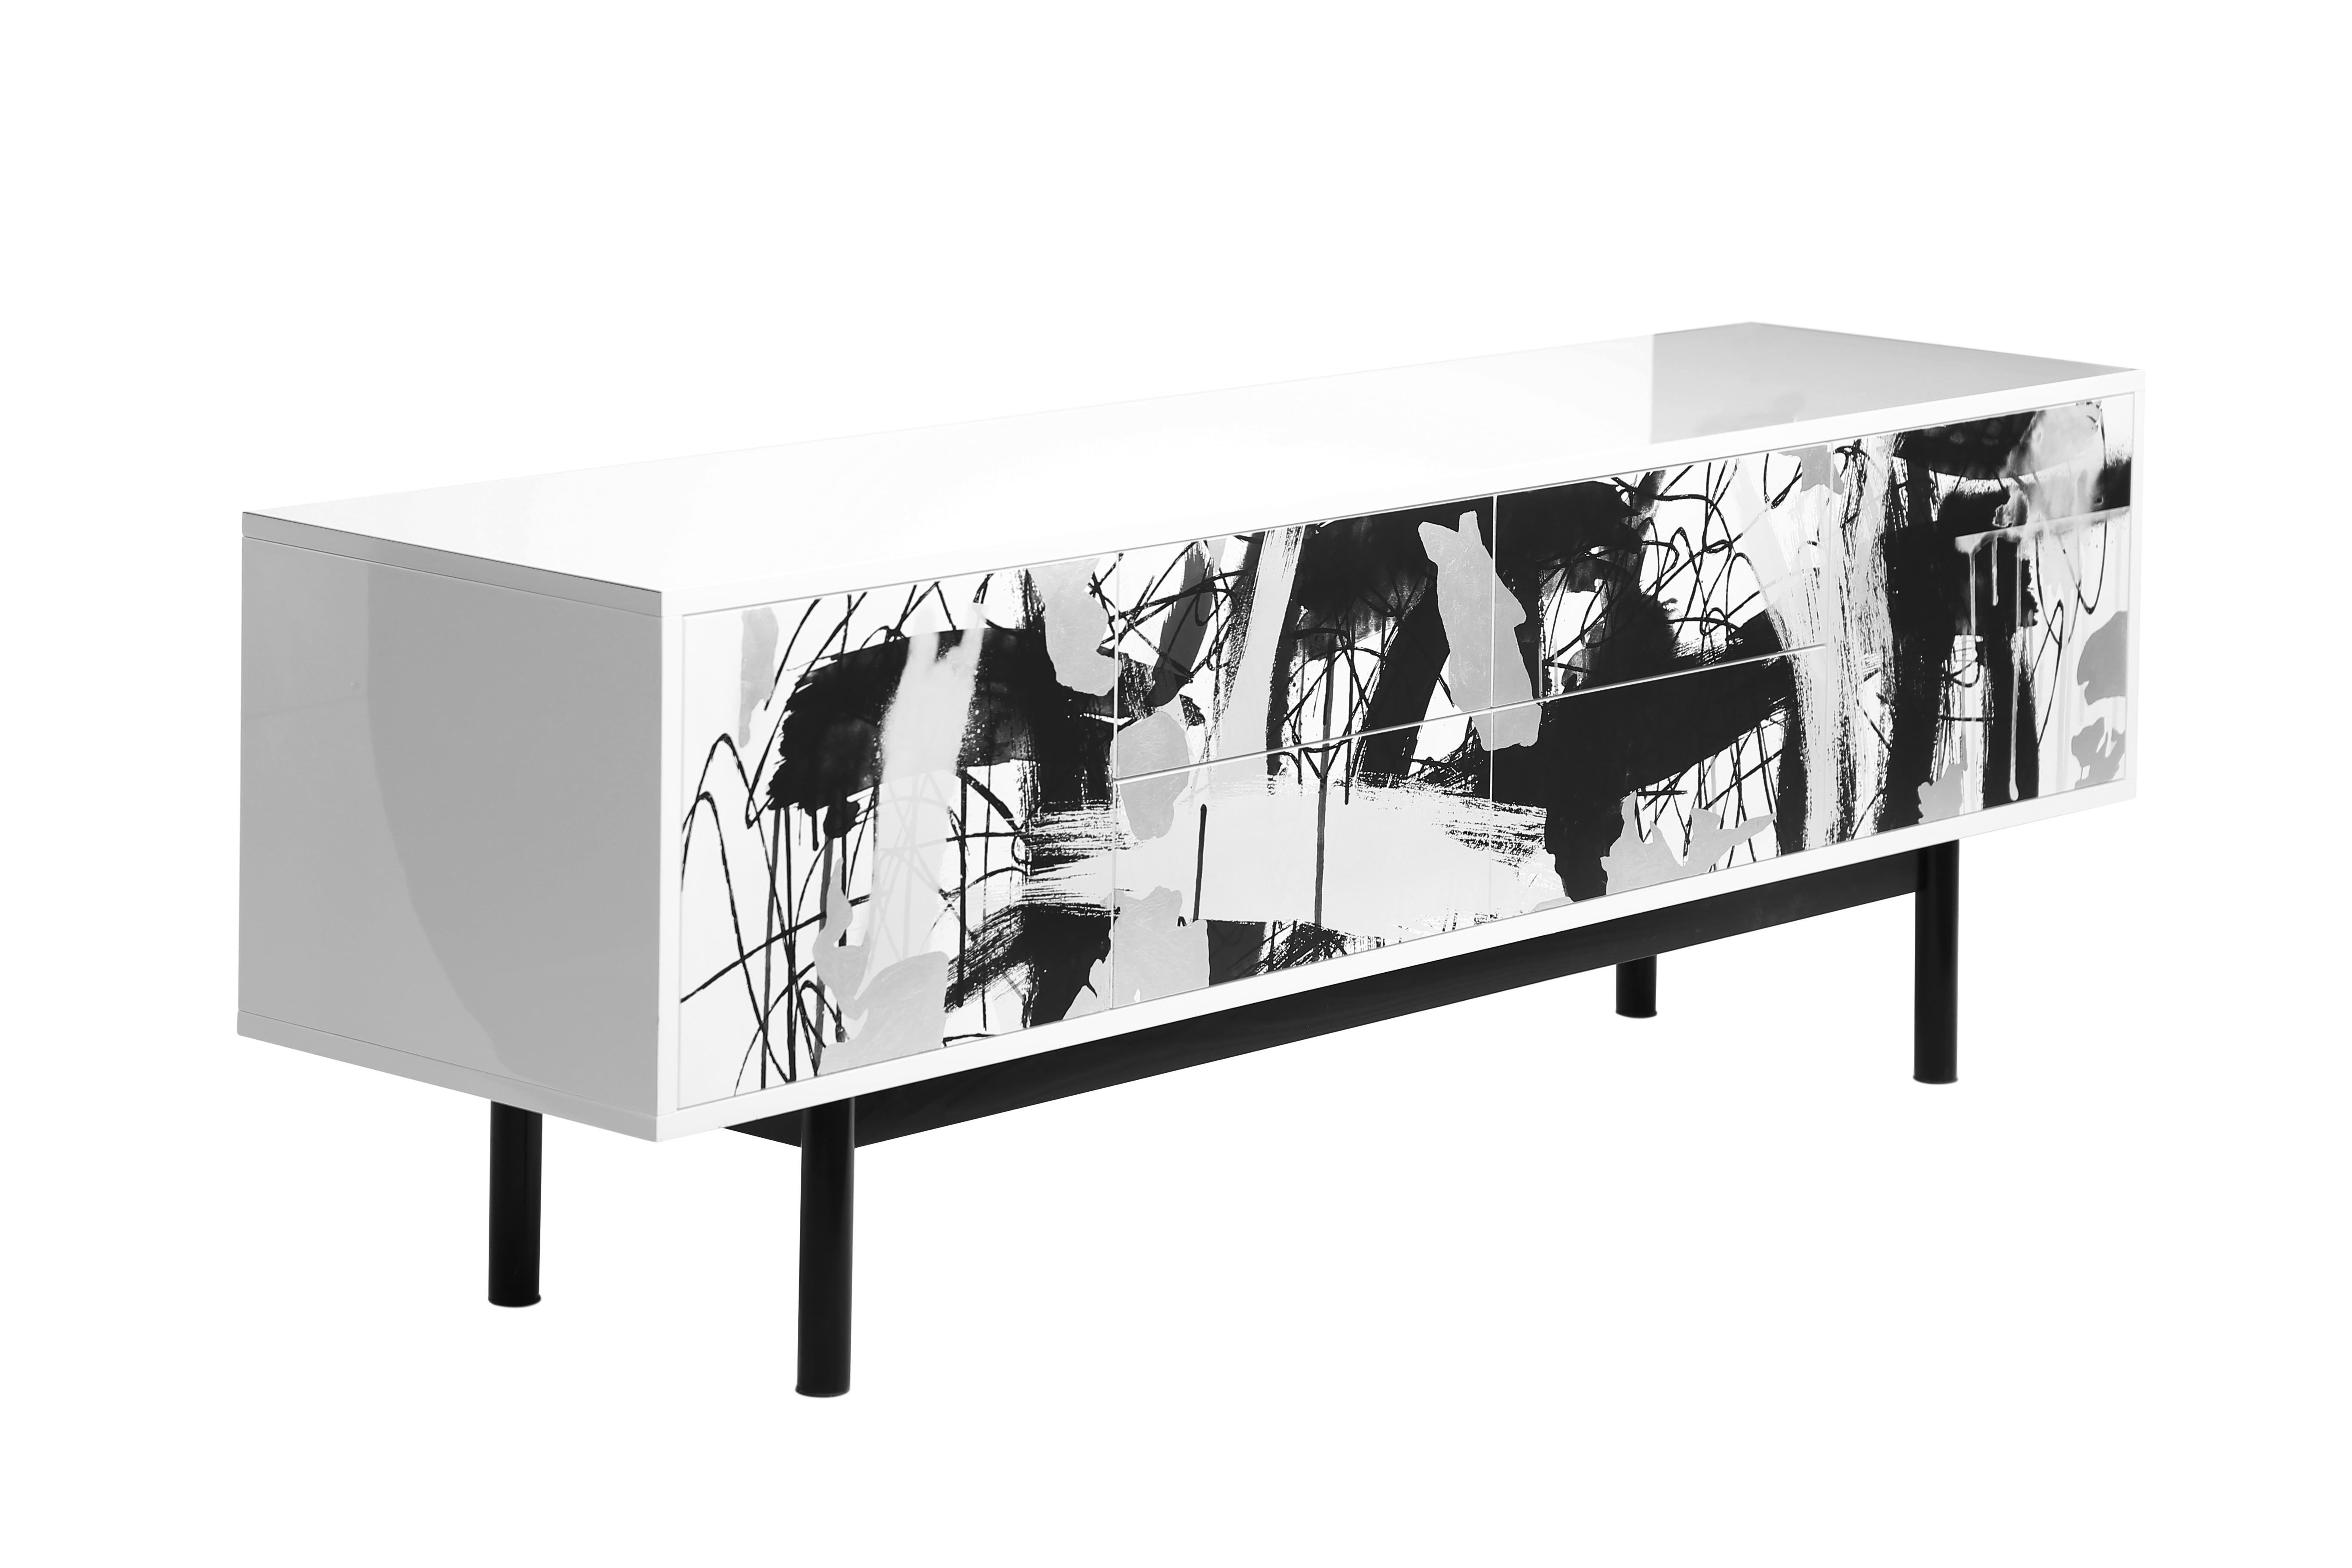 Worthy of its own award show! A modern mixture of function and style, the Splatter media console features clean lines, a uniquely gloss finish, and plenty of media space. This piece is also available in multiple metals and finishes

Designed by